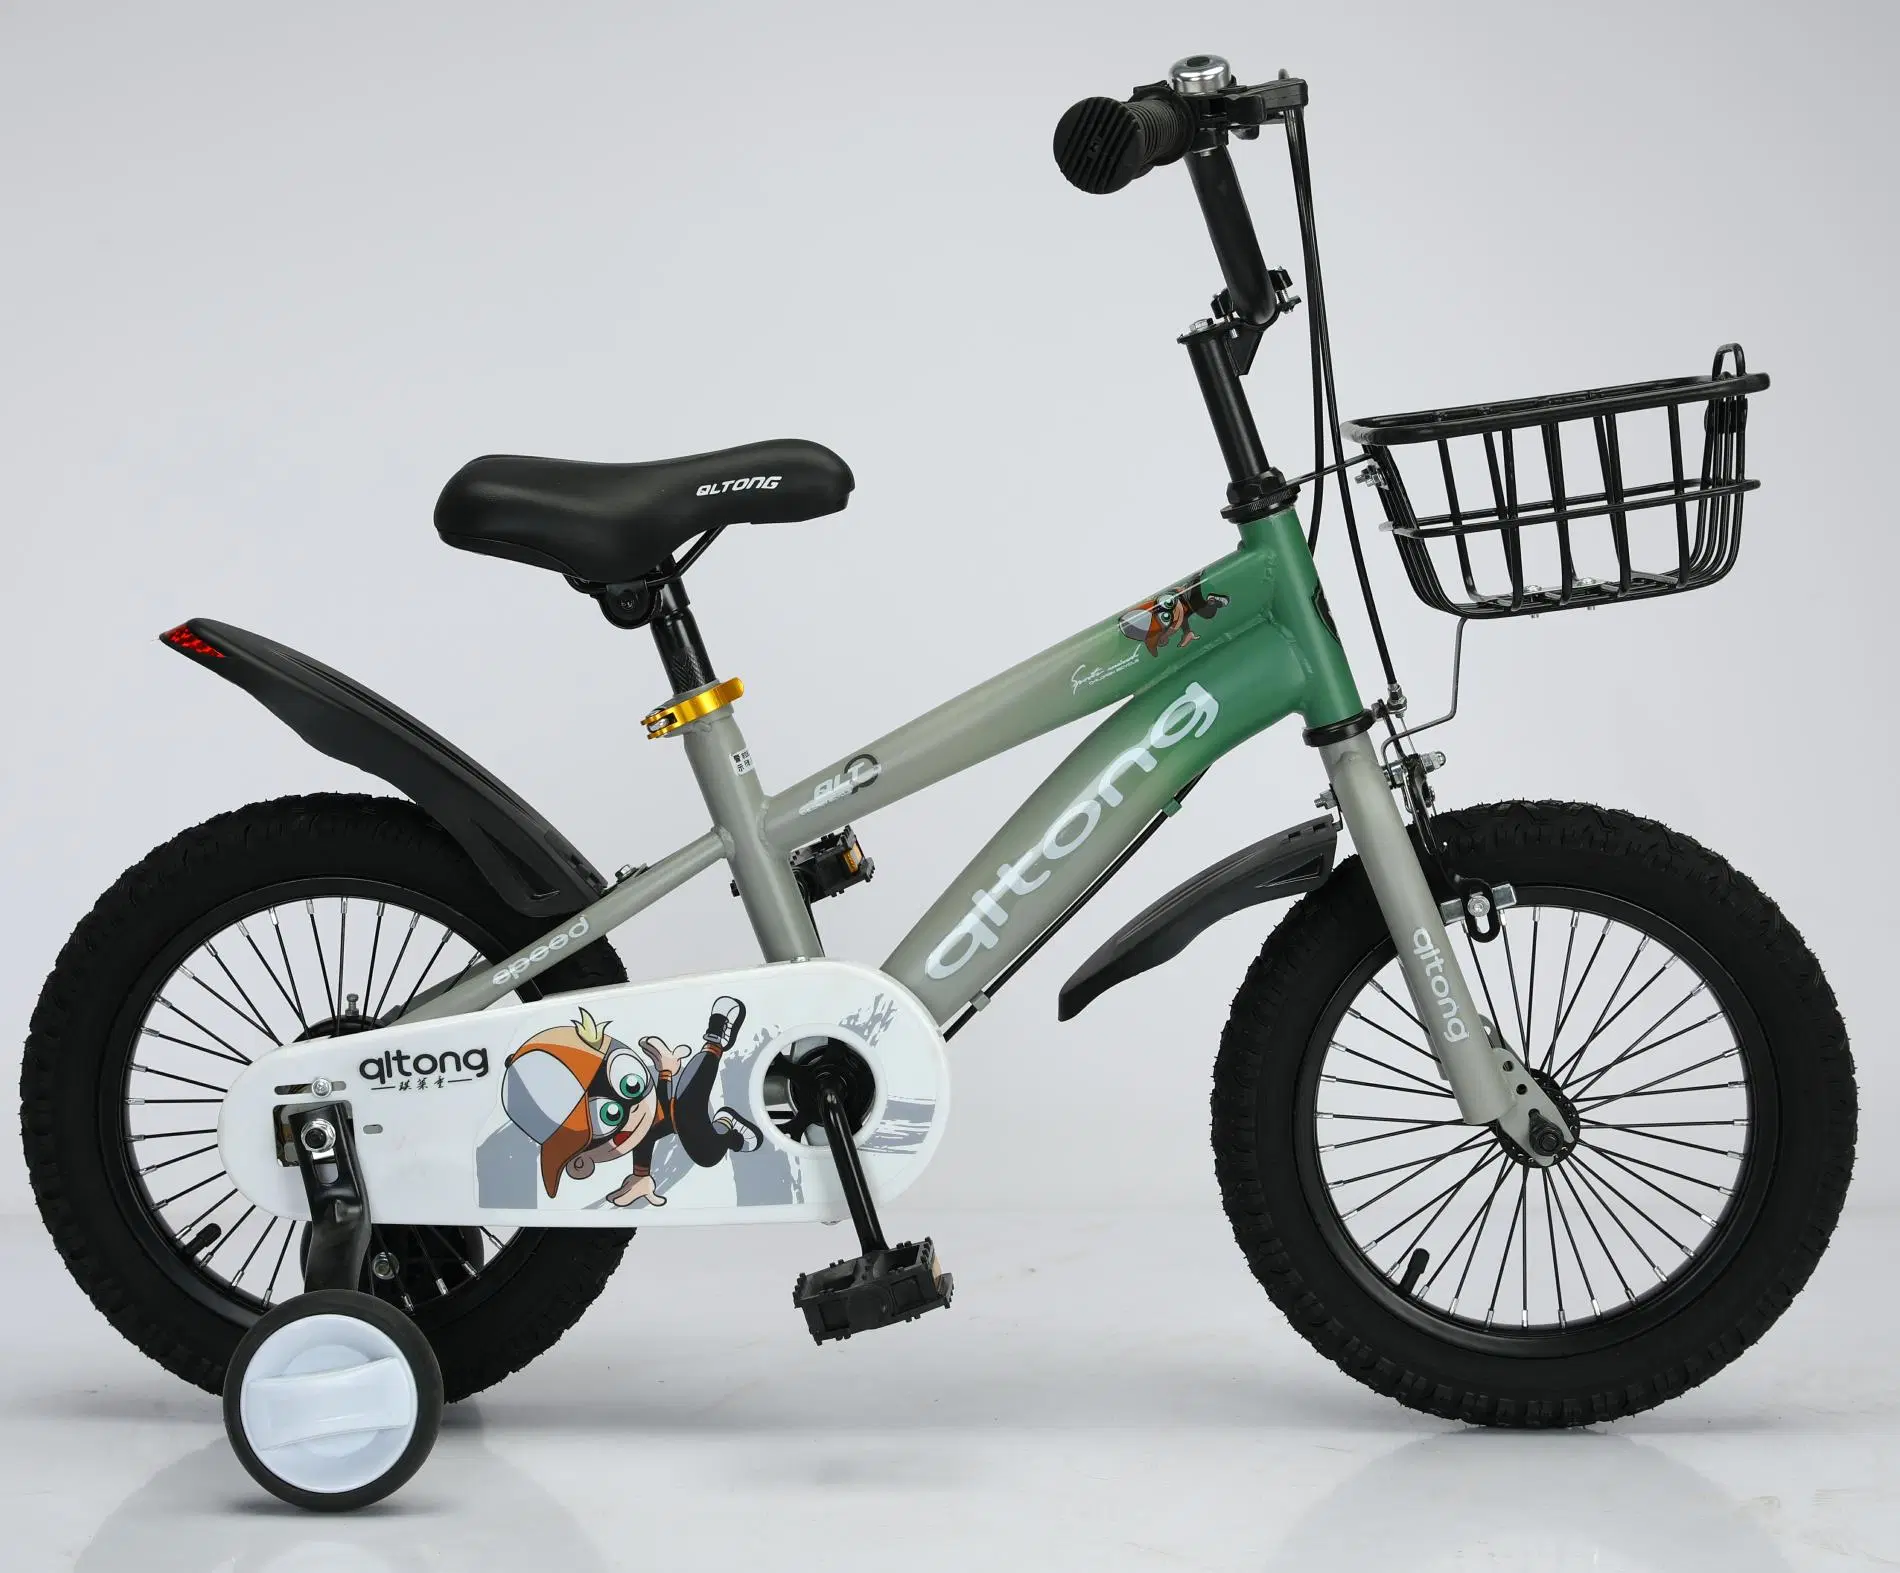 Hot Sale OEM Service Kids Bike/ Children Bicycle/ Kids Toy for 3-8 Years Old